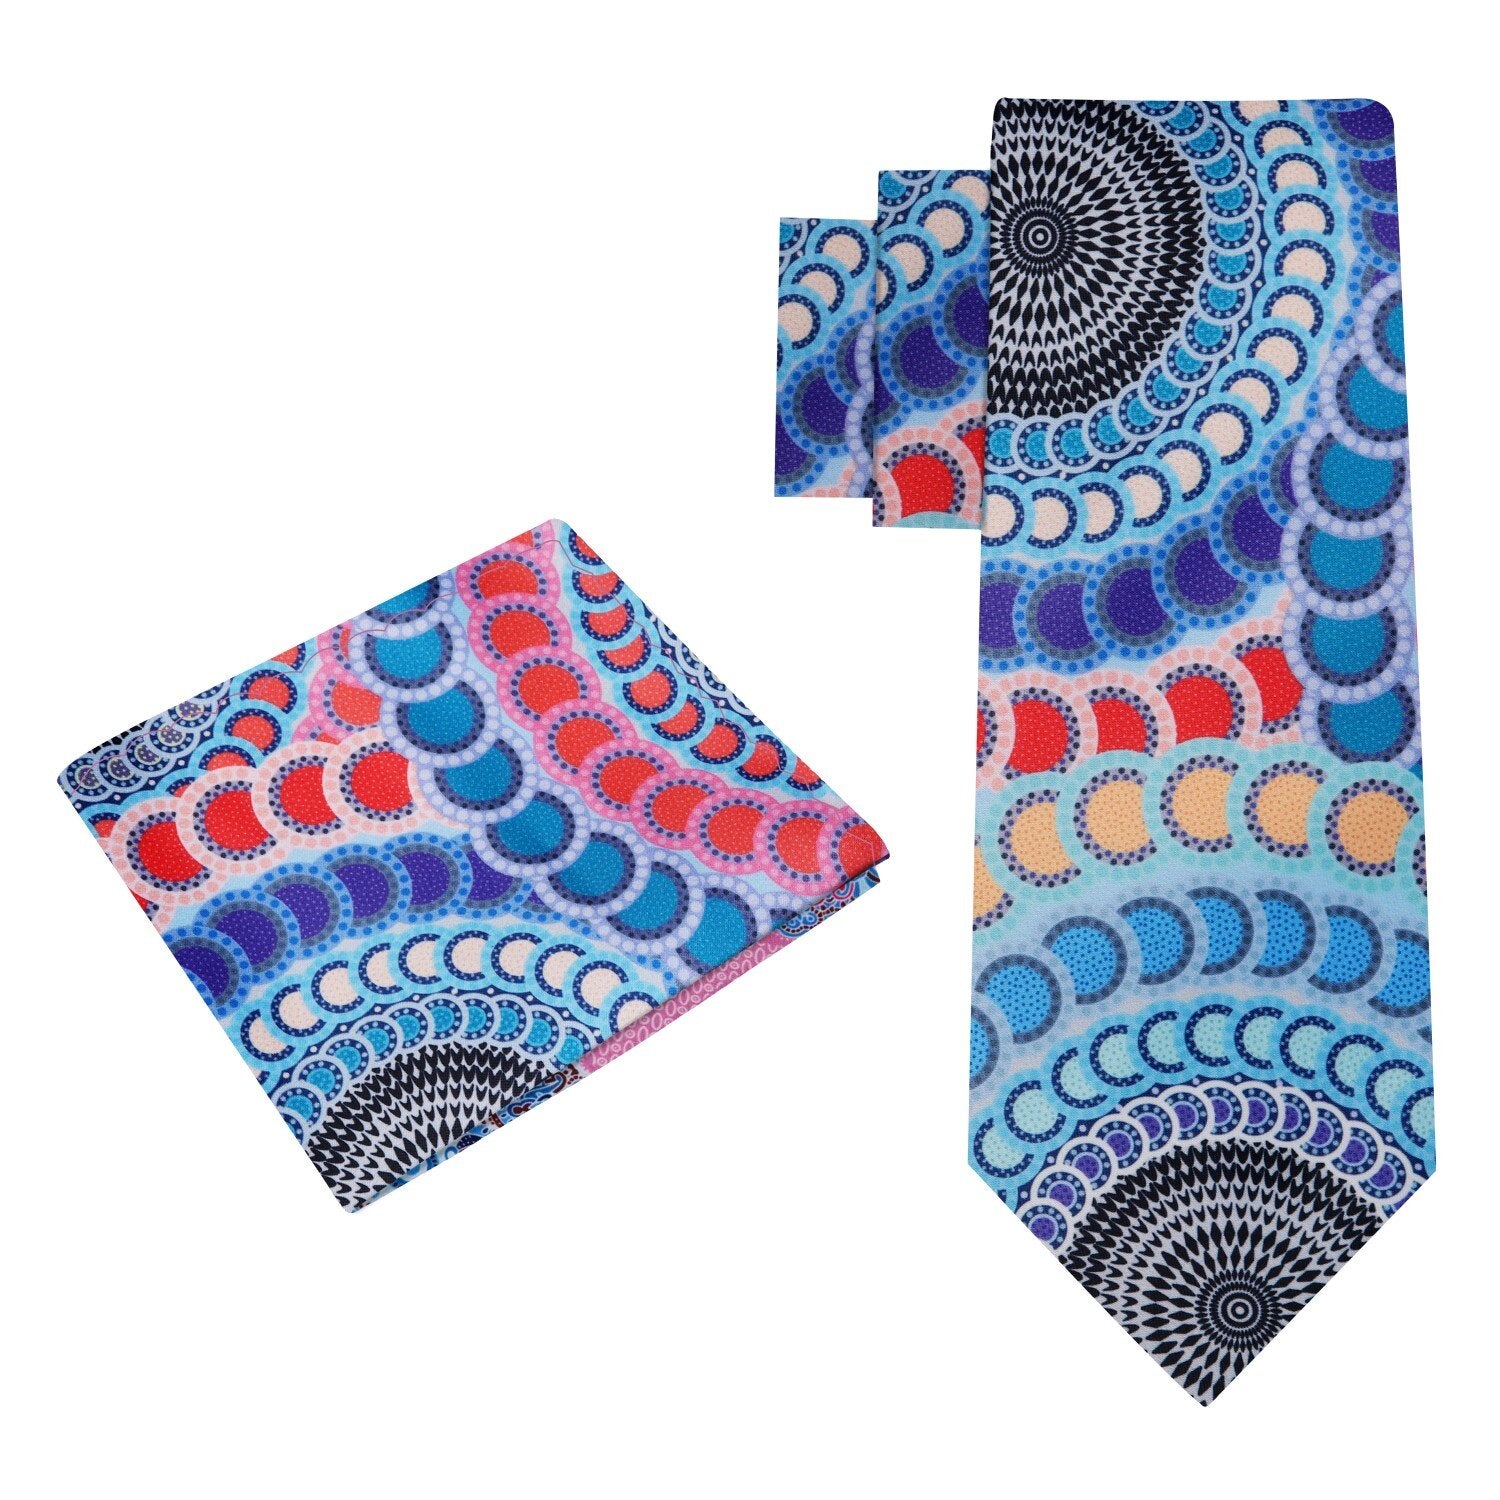 Alt View: A Blue, Red, Purple, Yellow Color Abstract Circles Pattern Silk Tie, Pocket Square